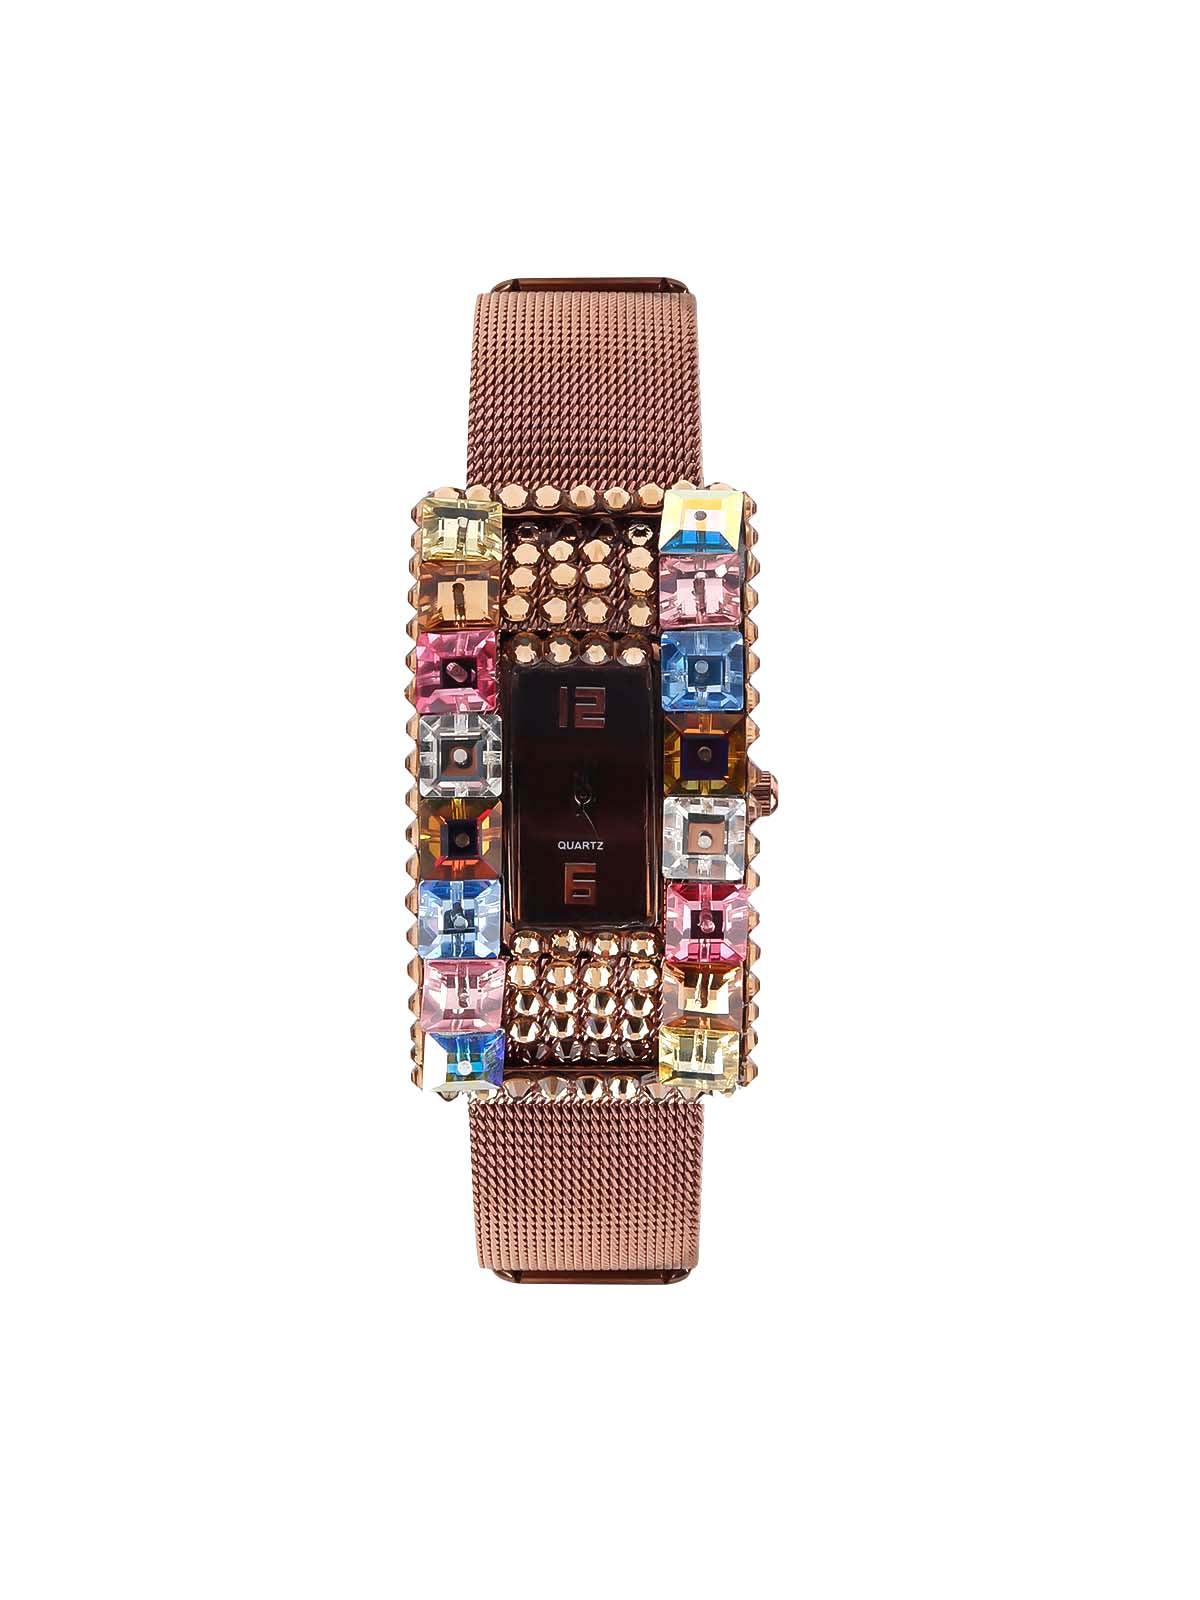 Stunning gold tone metal watch for women - Odette